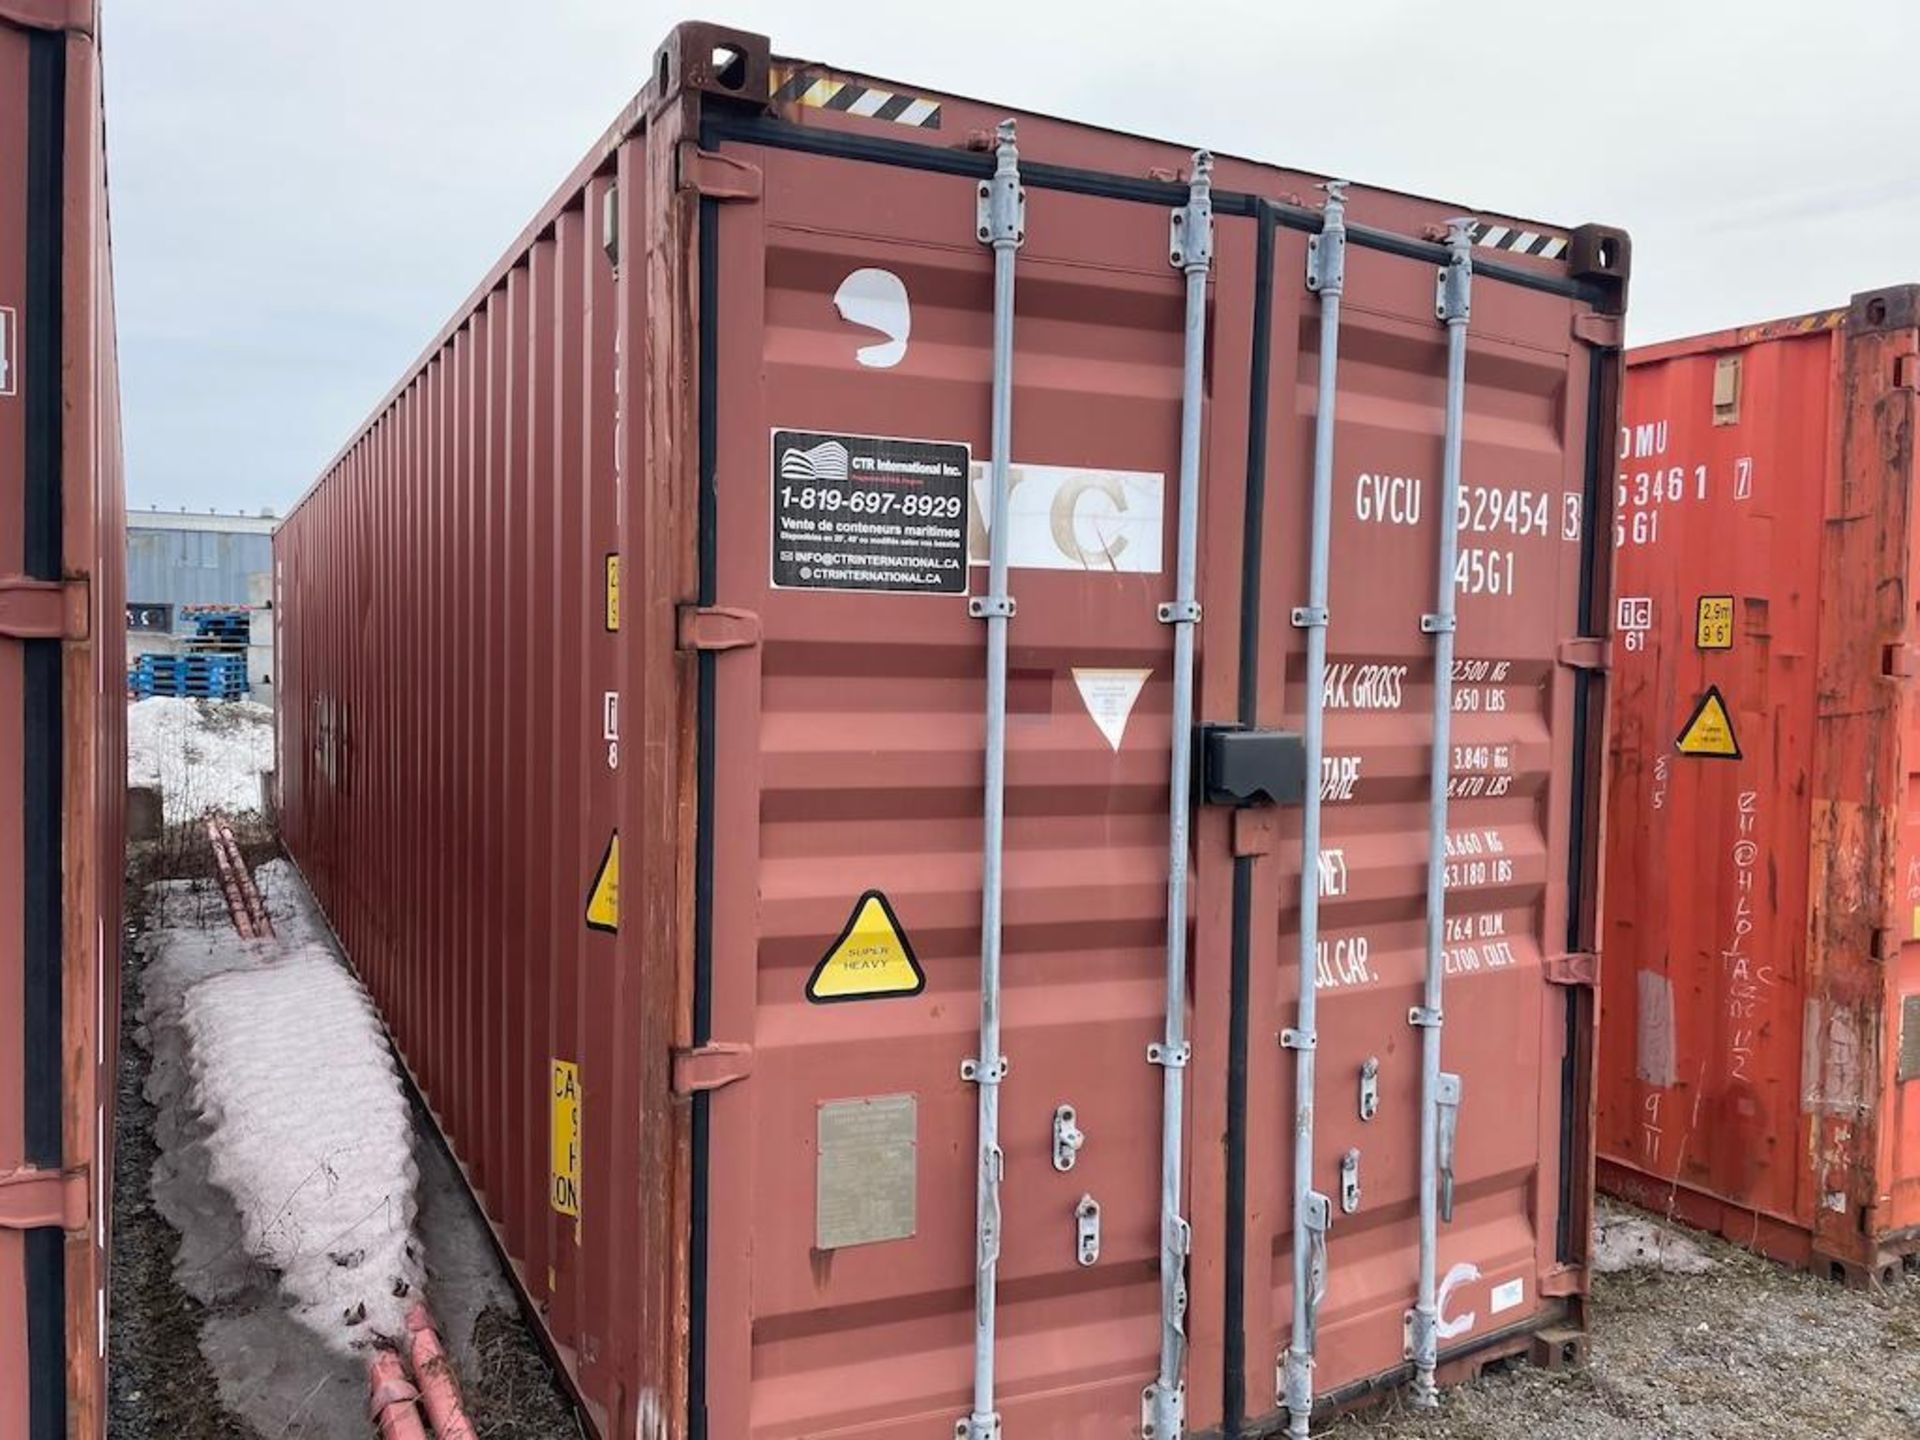 40 FT SEA CONTAINER, EXCLUDING CONTENTS, DELAYED PICK UP UNTIL MAY 13 [19] [TROIS RIVIERES] *PLEASE